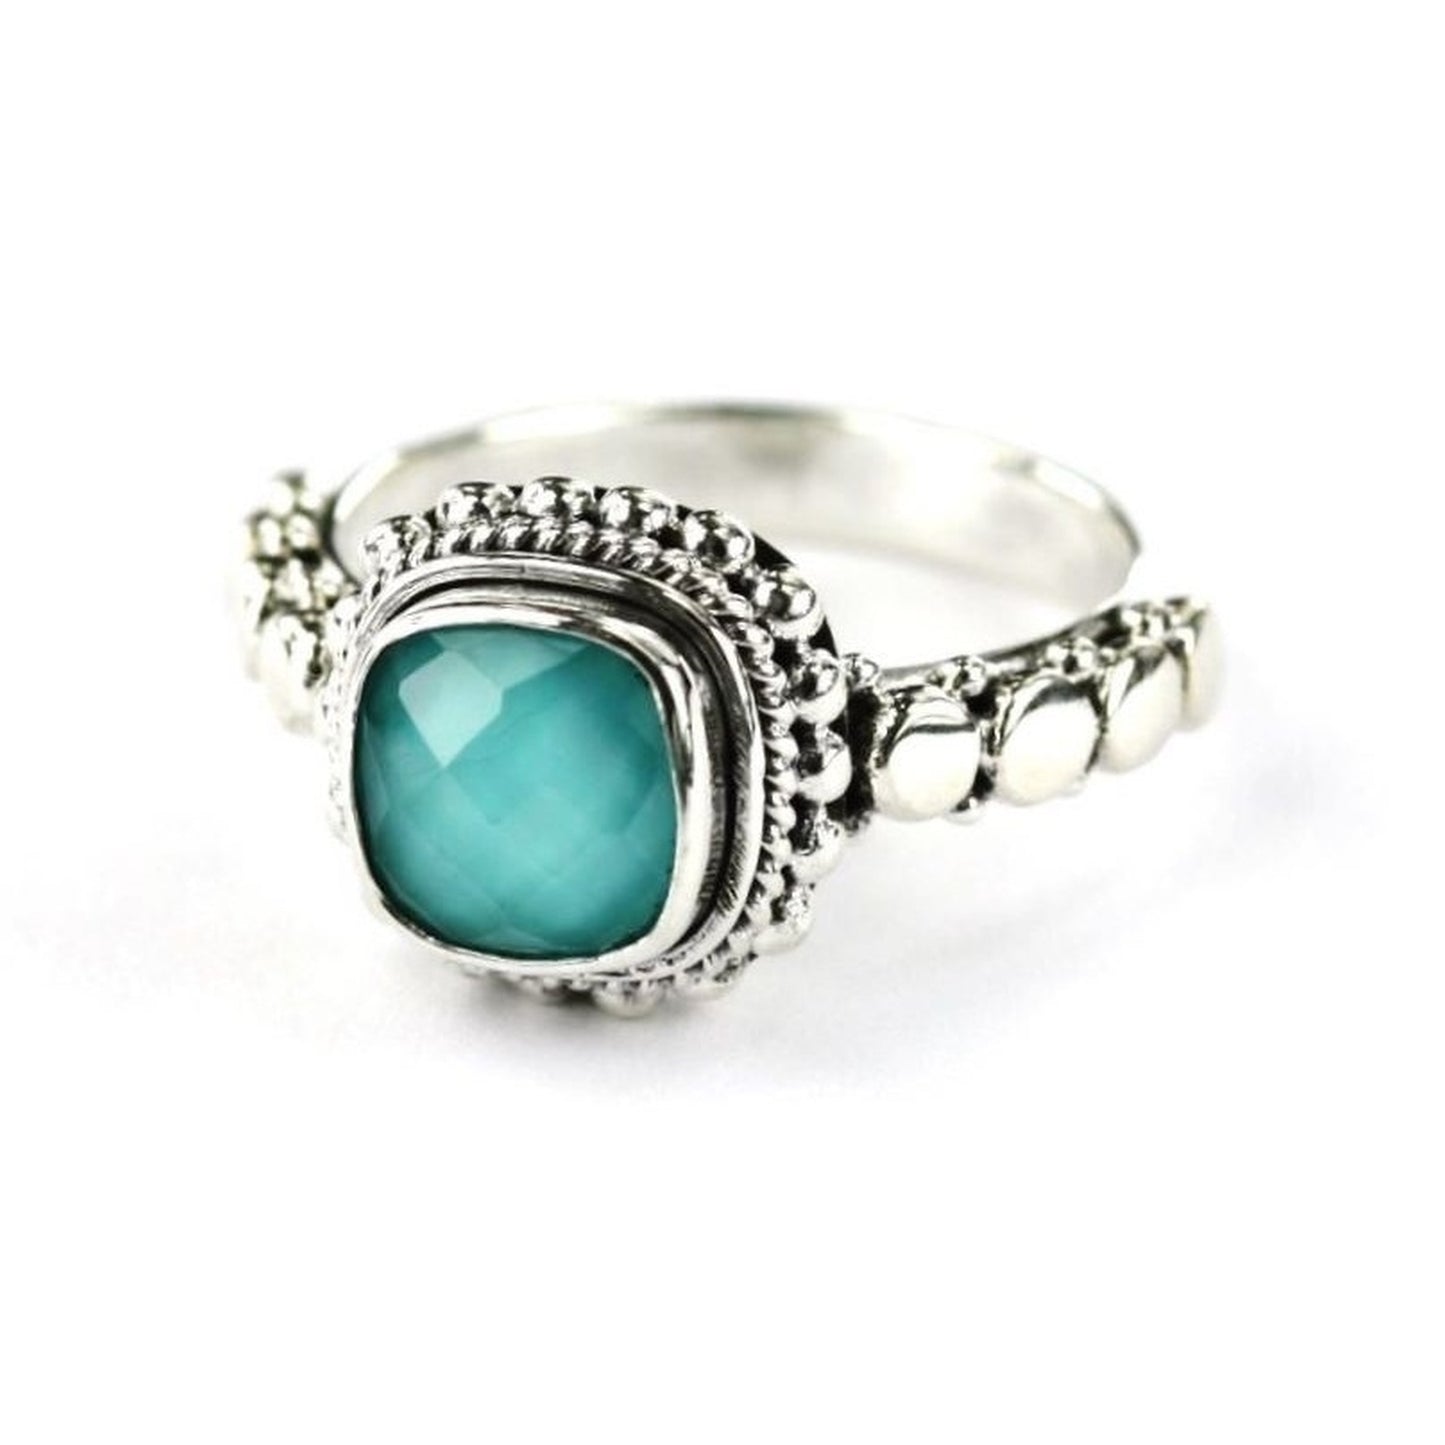 Silver ring with turquoise doublet gemstone.